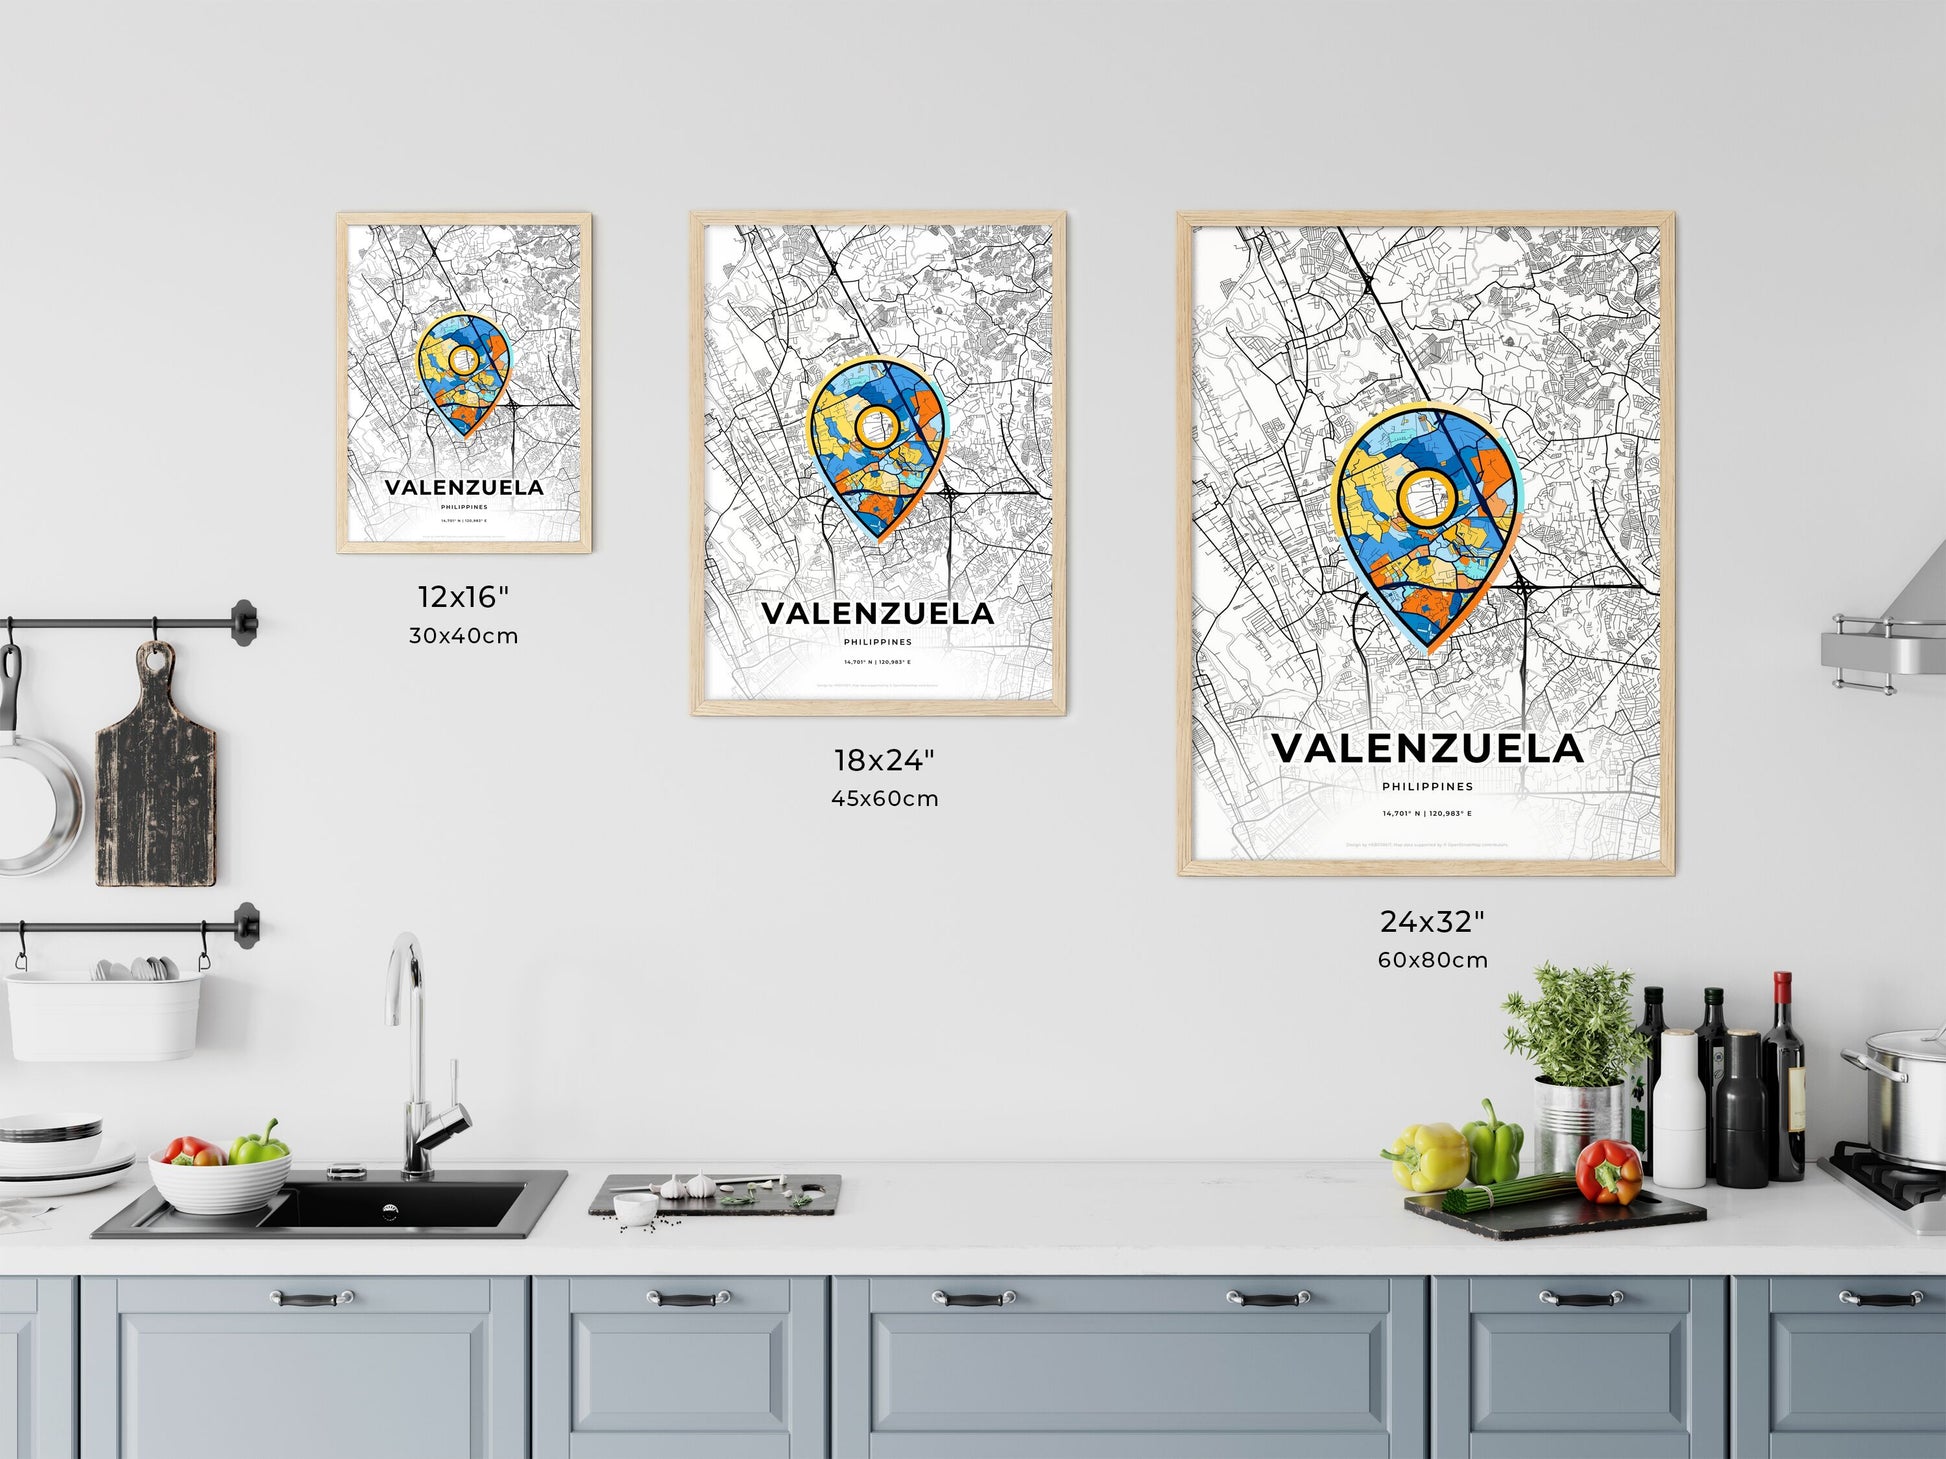 VALENZUELA PHILIPPINES minimal art map with a colorful icon. Where it all began, Couple map gift.